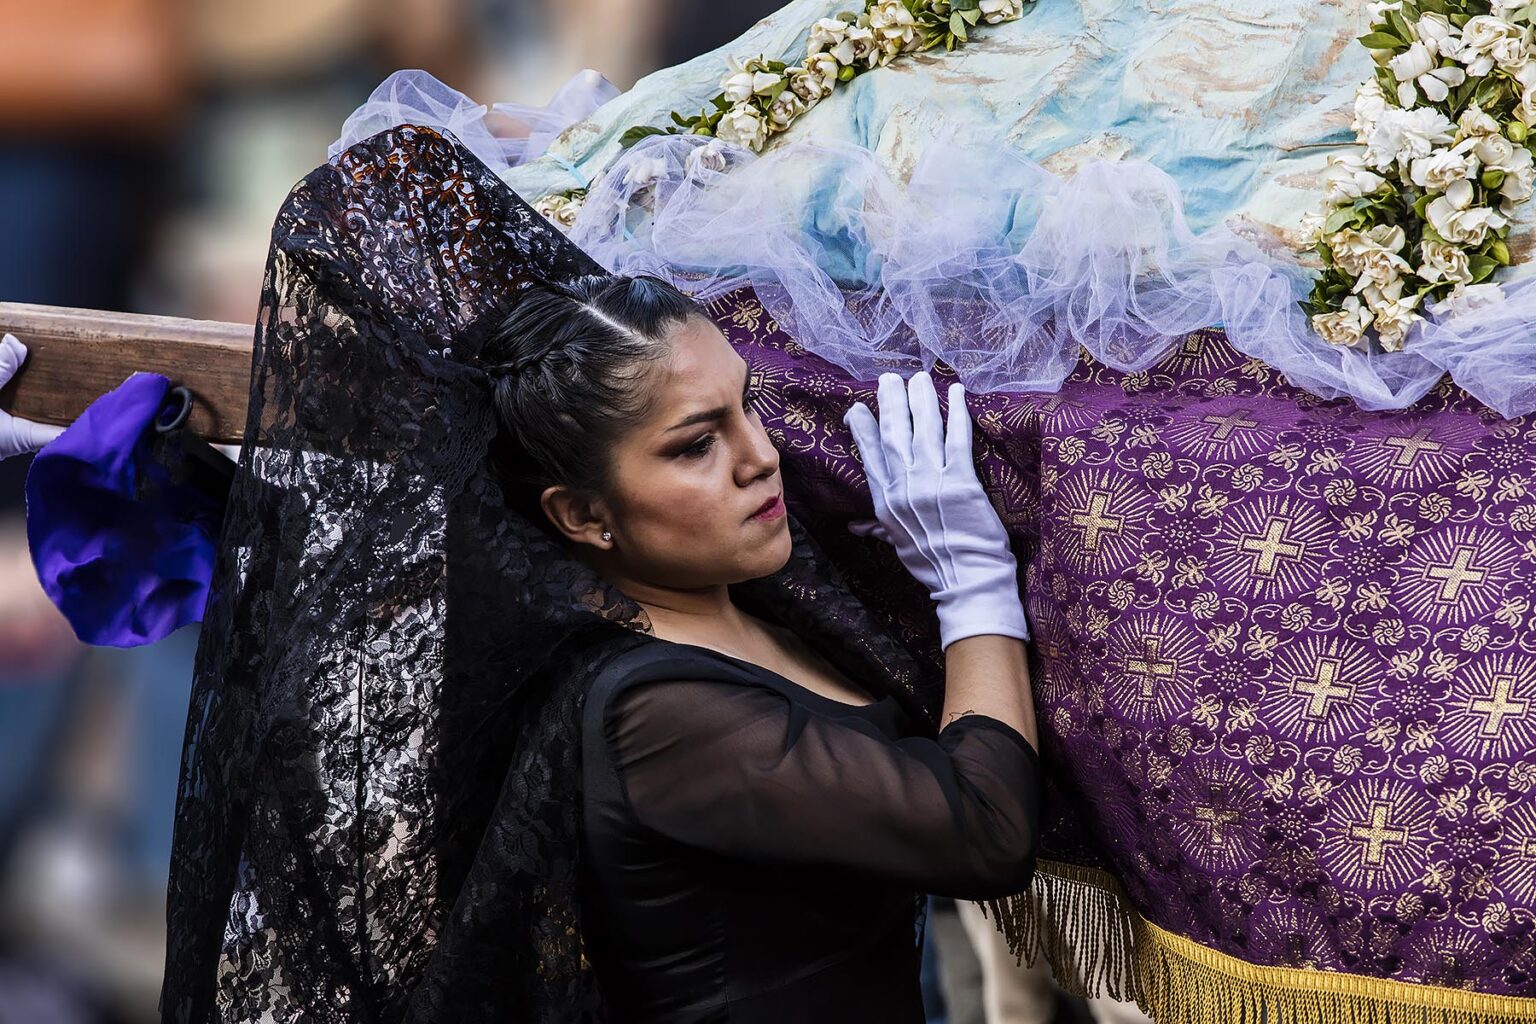 Women dressed in traditional mantillas carry religious statues in the Good Friday Procession, known as the Santo Entierro, from the ORATORIO CHURCH - SAN MIGUEL DE ALLENDE, MEXICO